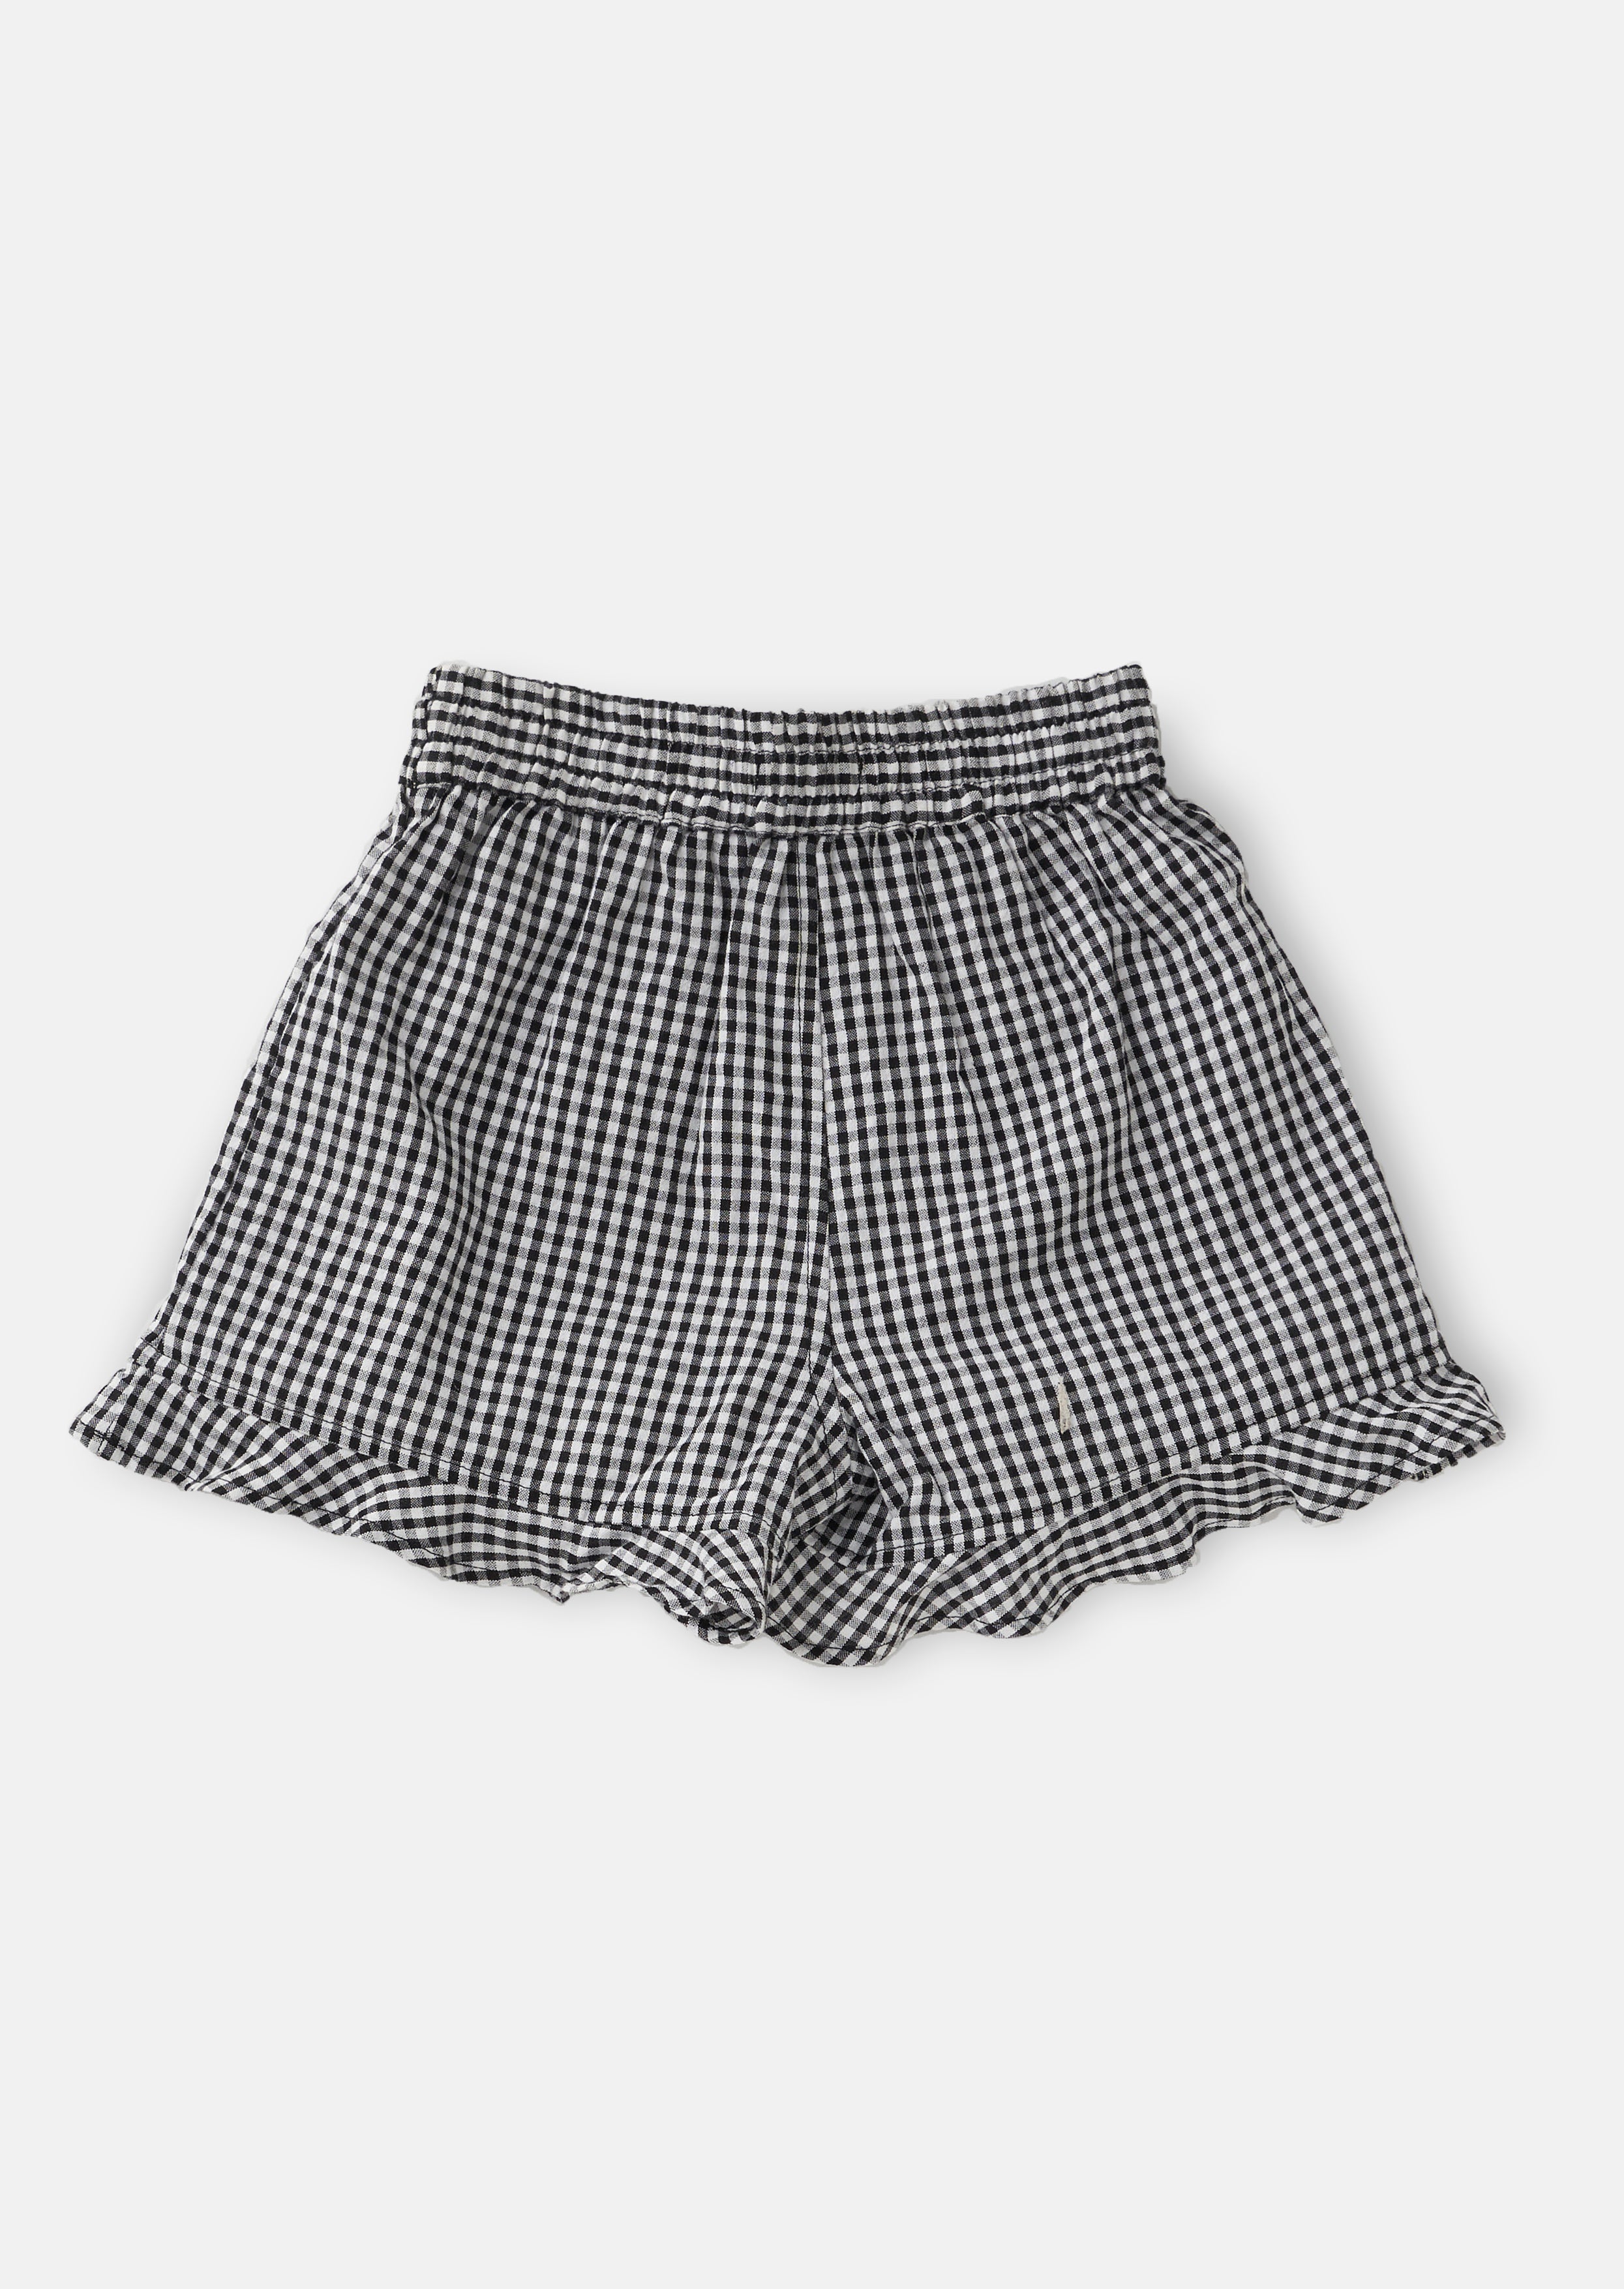 Girls Black and White Checked Shorts